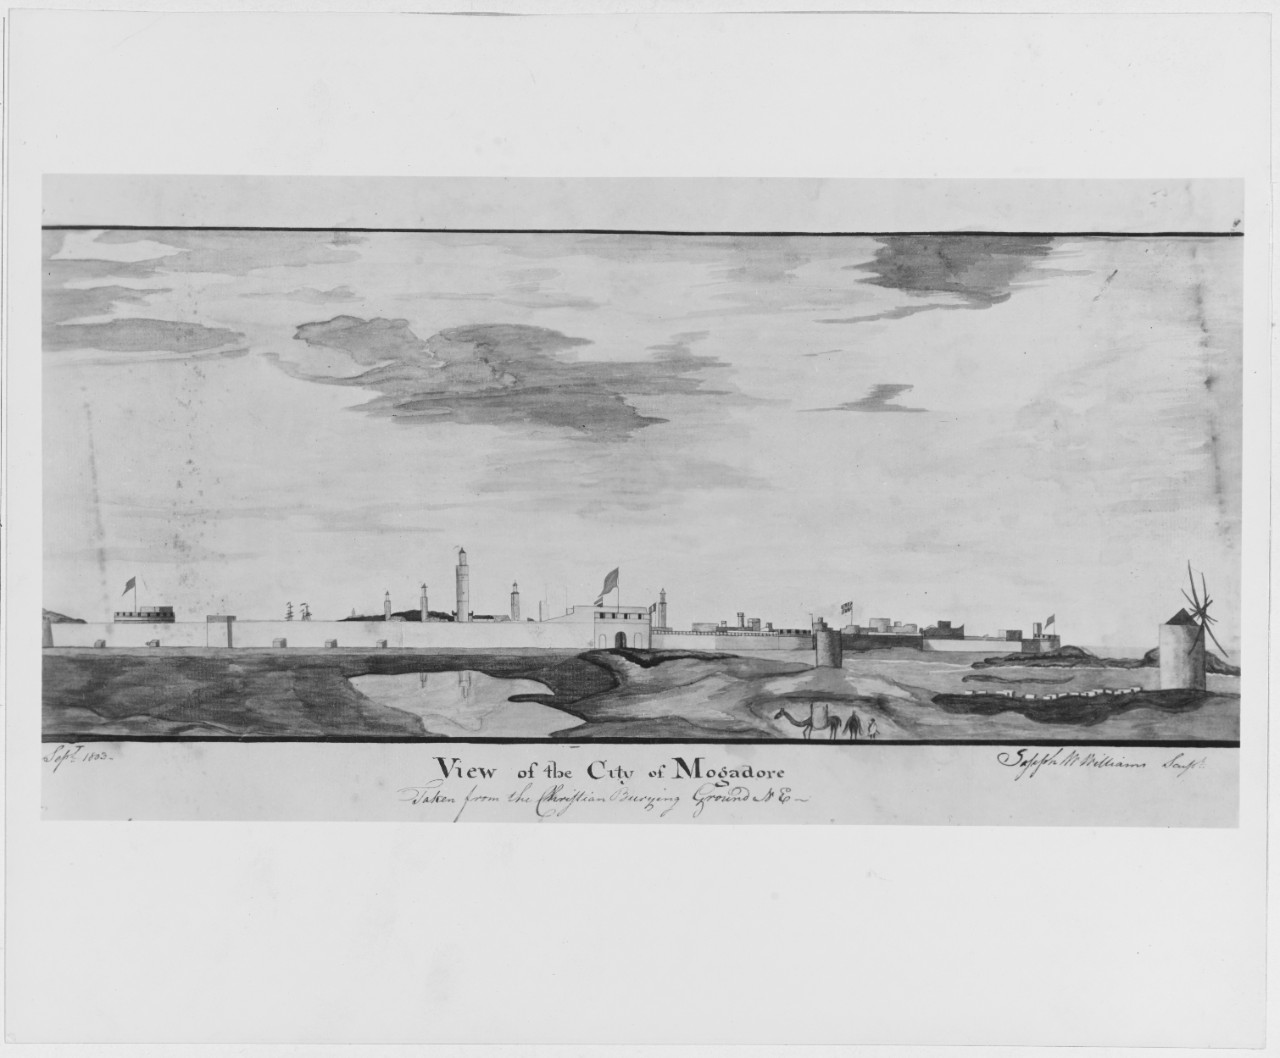 View of the City of Mogadore Taken from the Christian Burying Grounds. September 1803